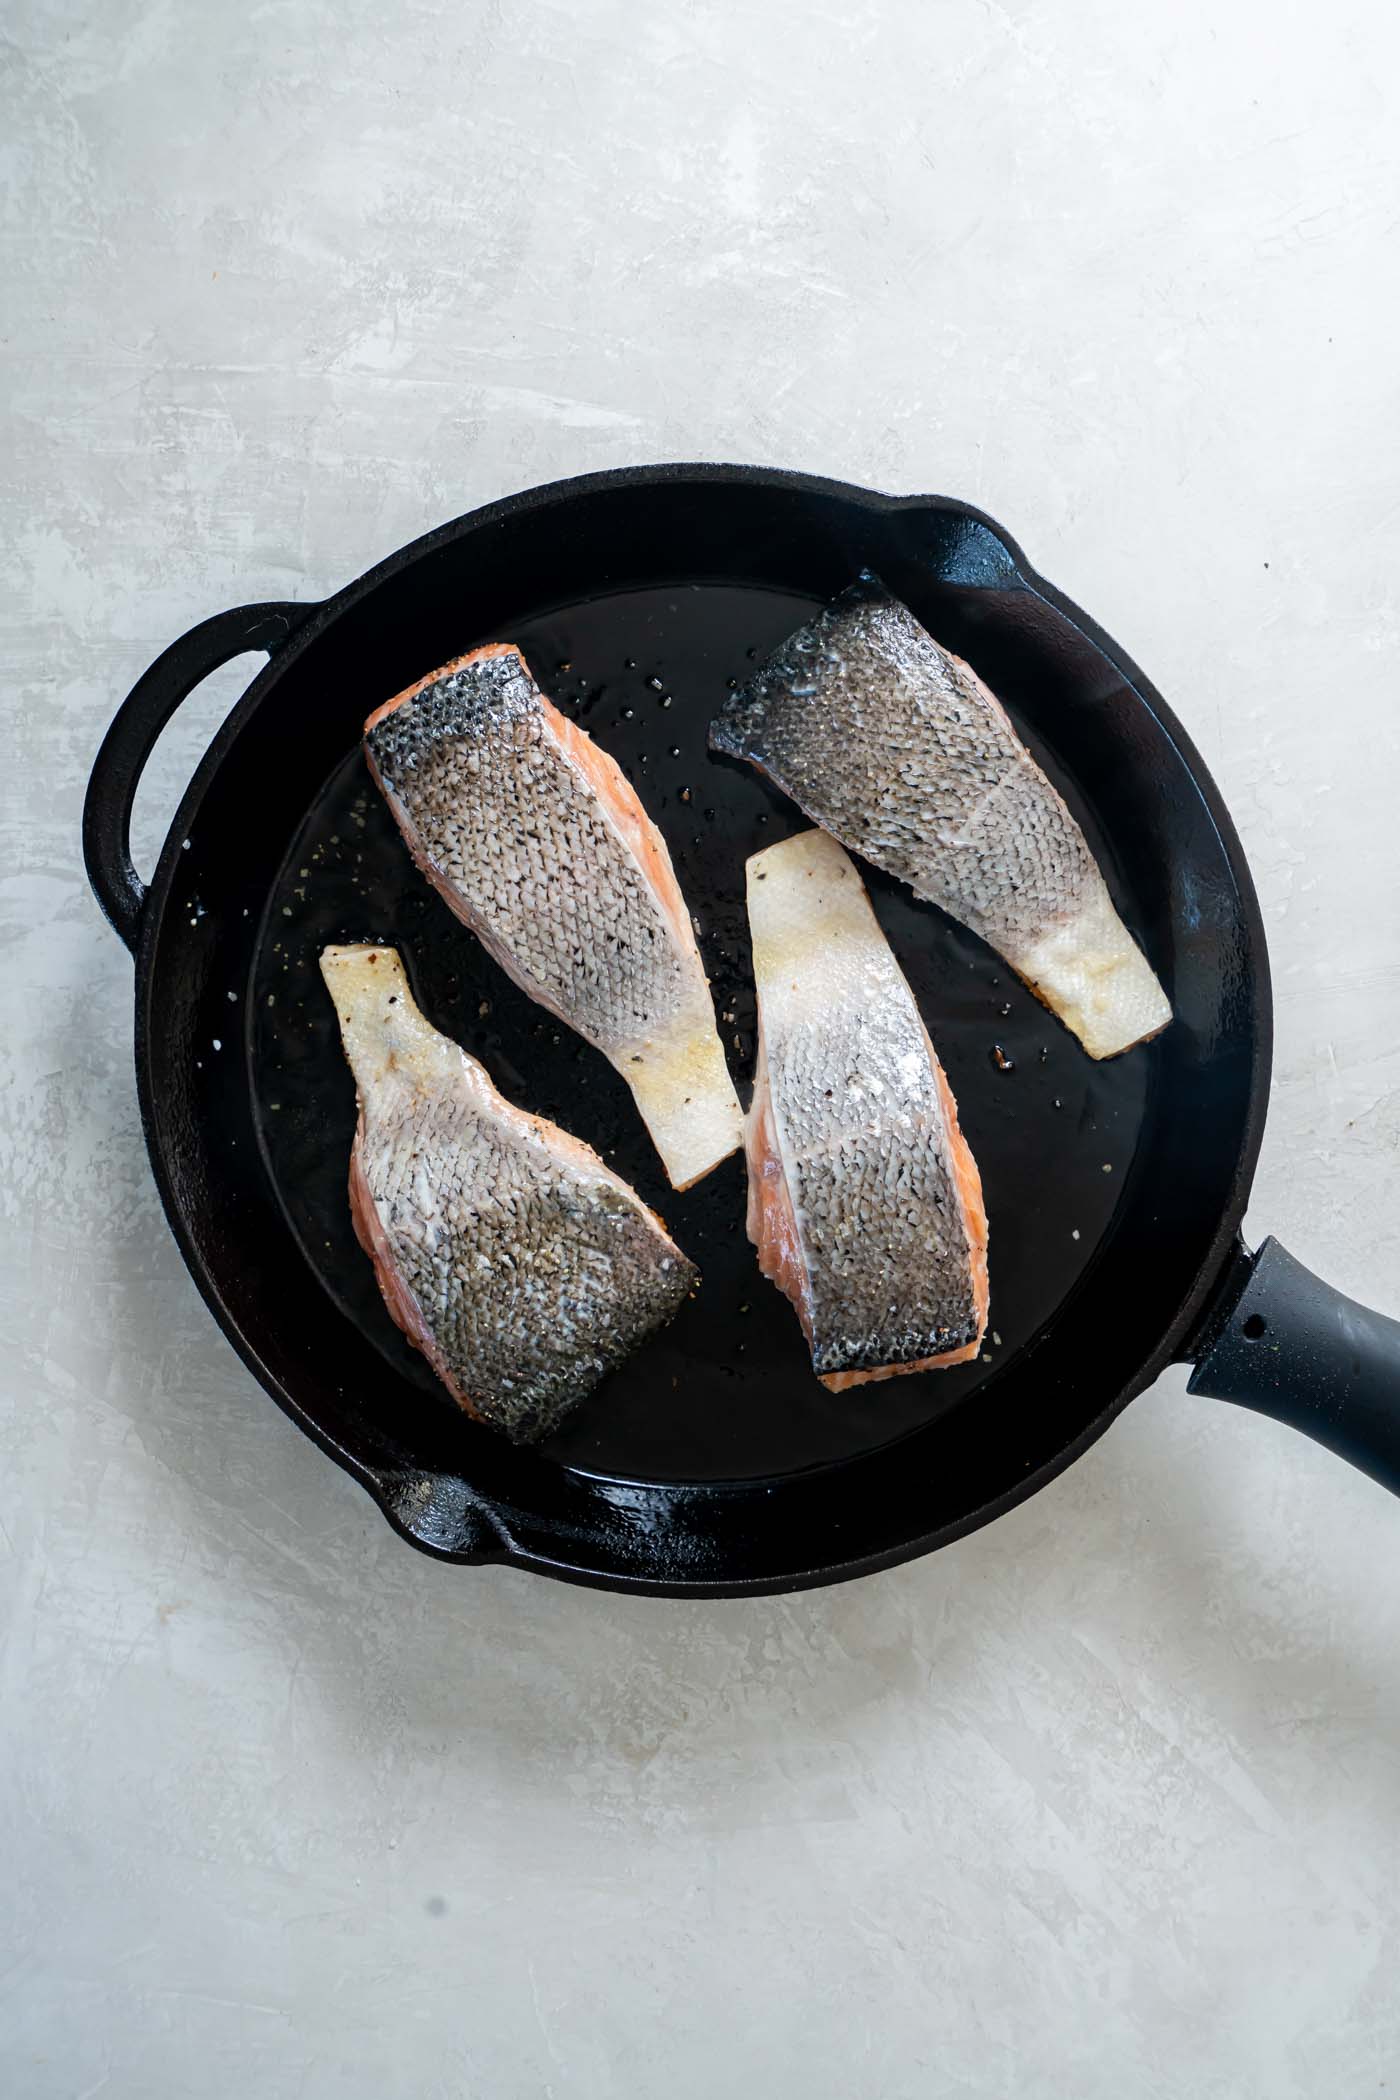 Four salmon fillets in a skillet with the skin side up.